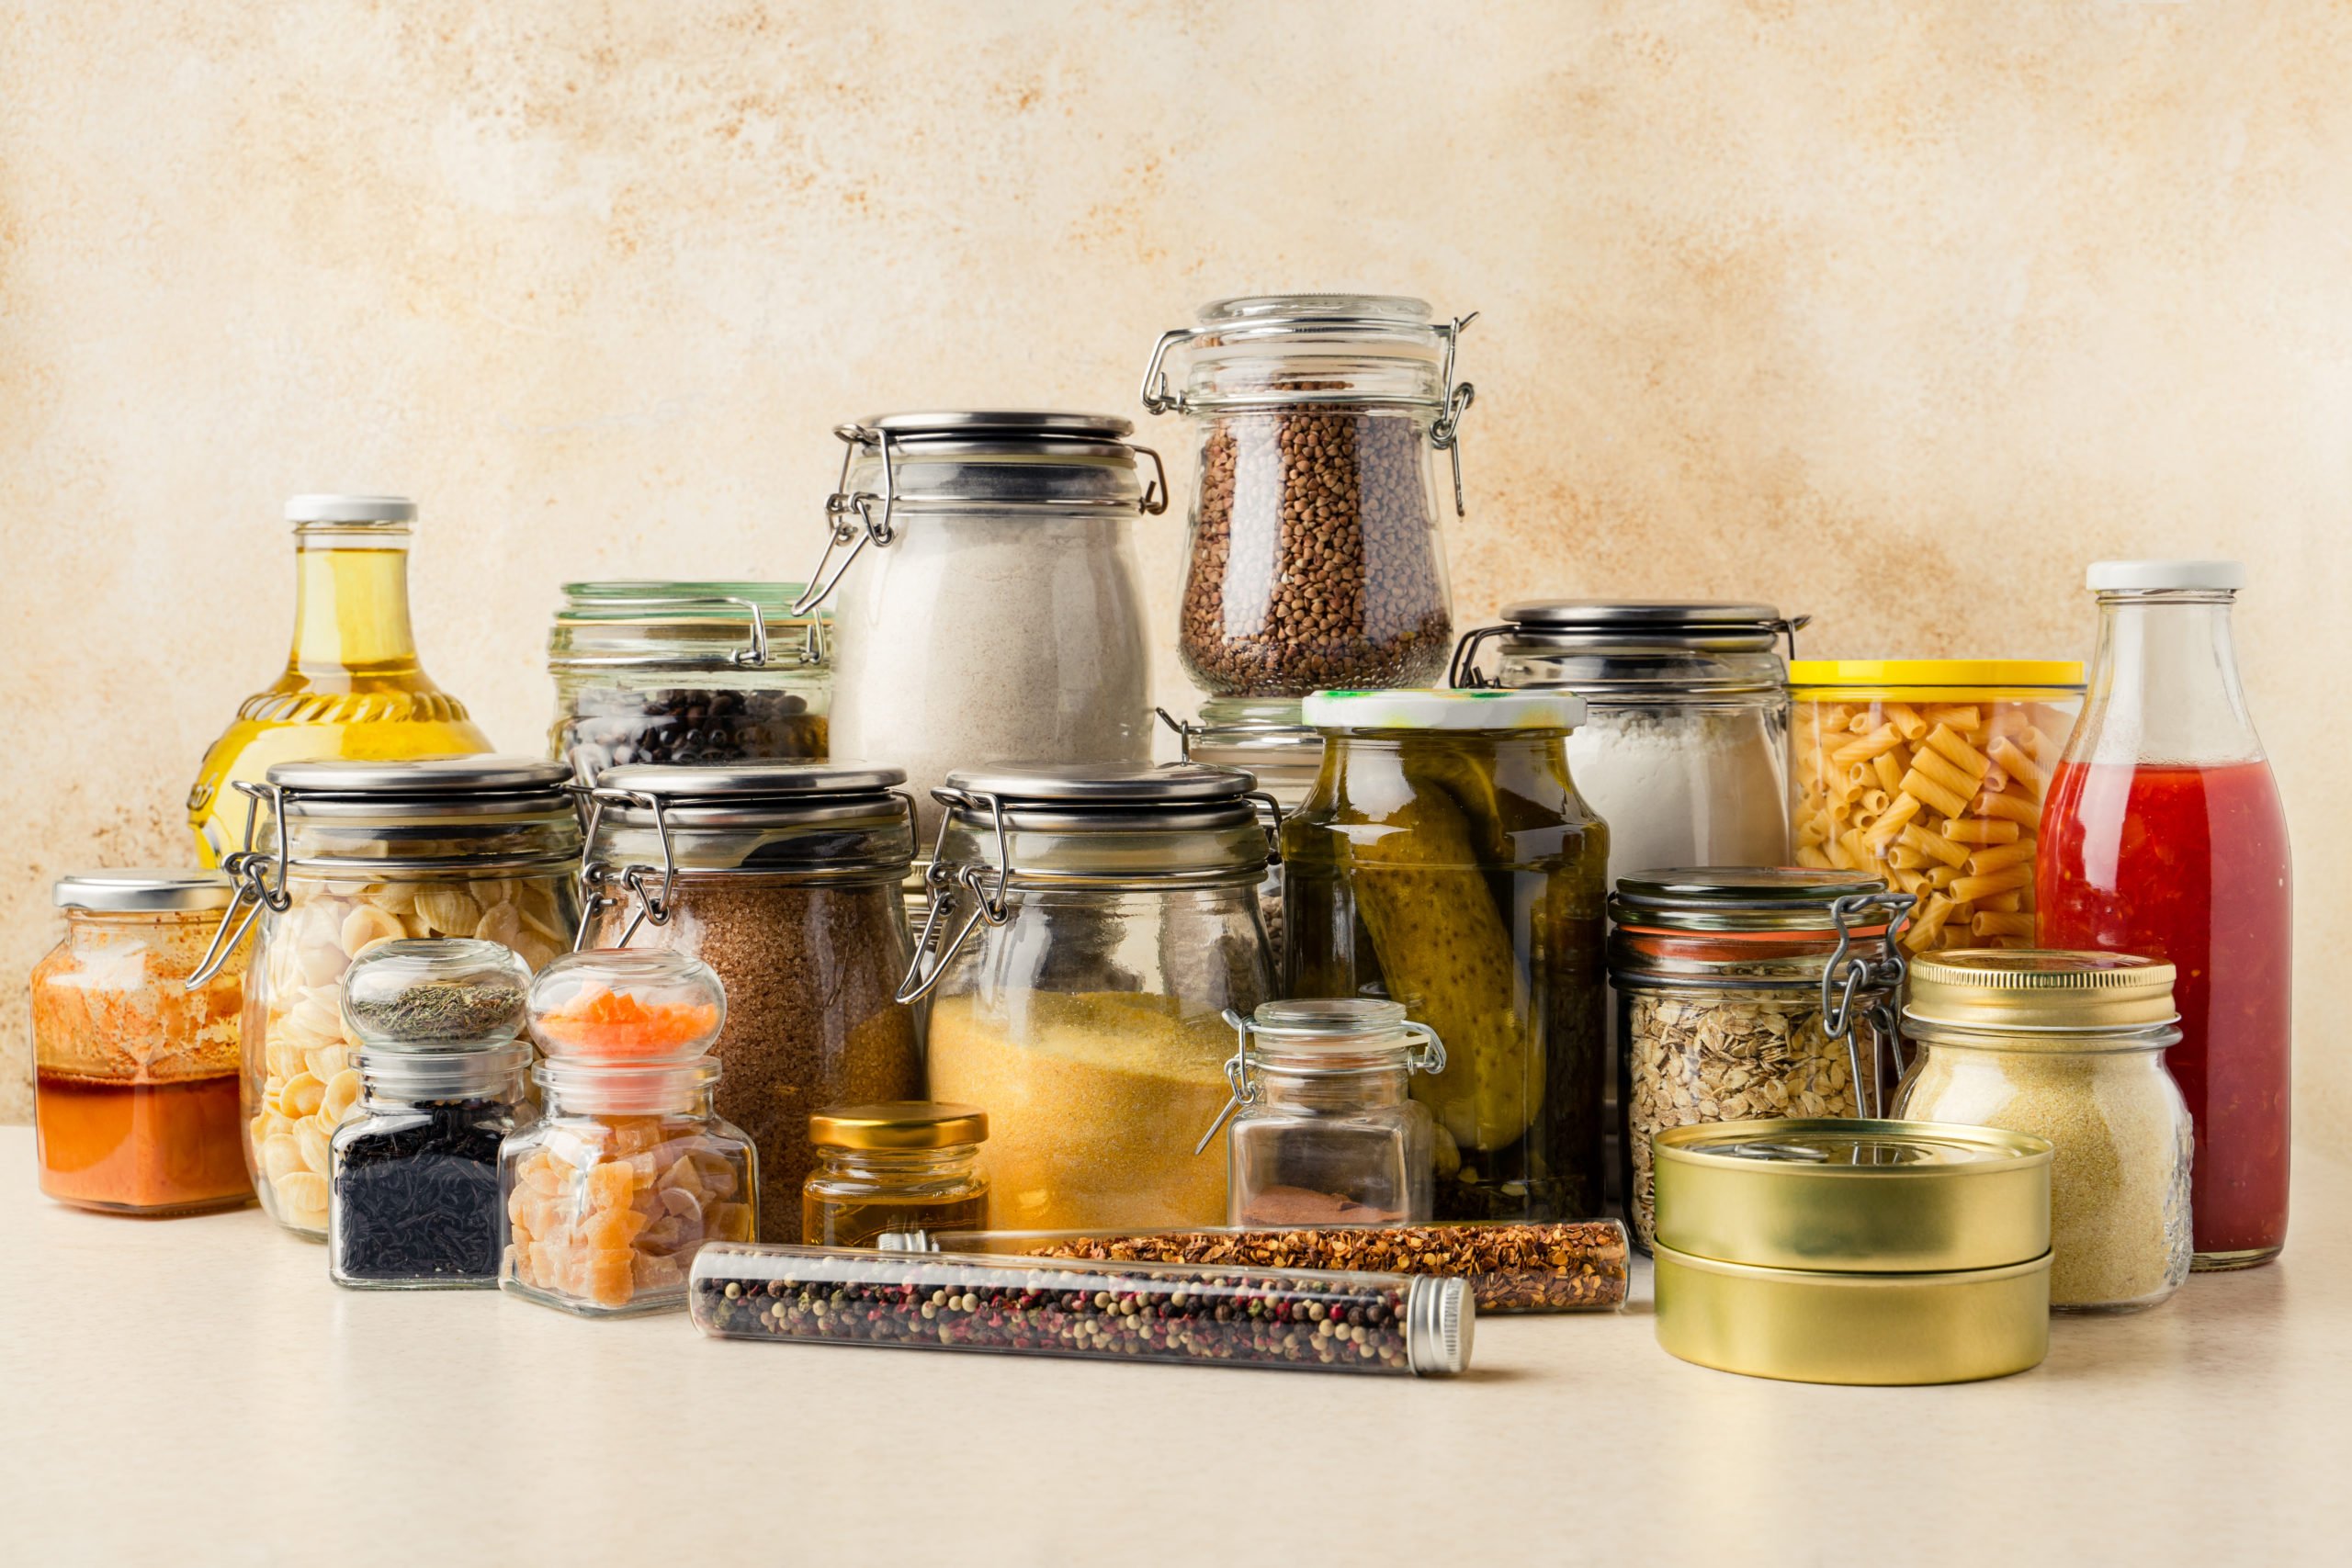 Various food supplies including grains, condiments, tomato sauce, oil in glass bottles and jars, dry pasta, canned produce on kitchen table. Sustainability concept. Horizontal orientation